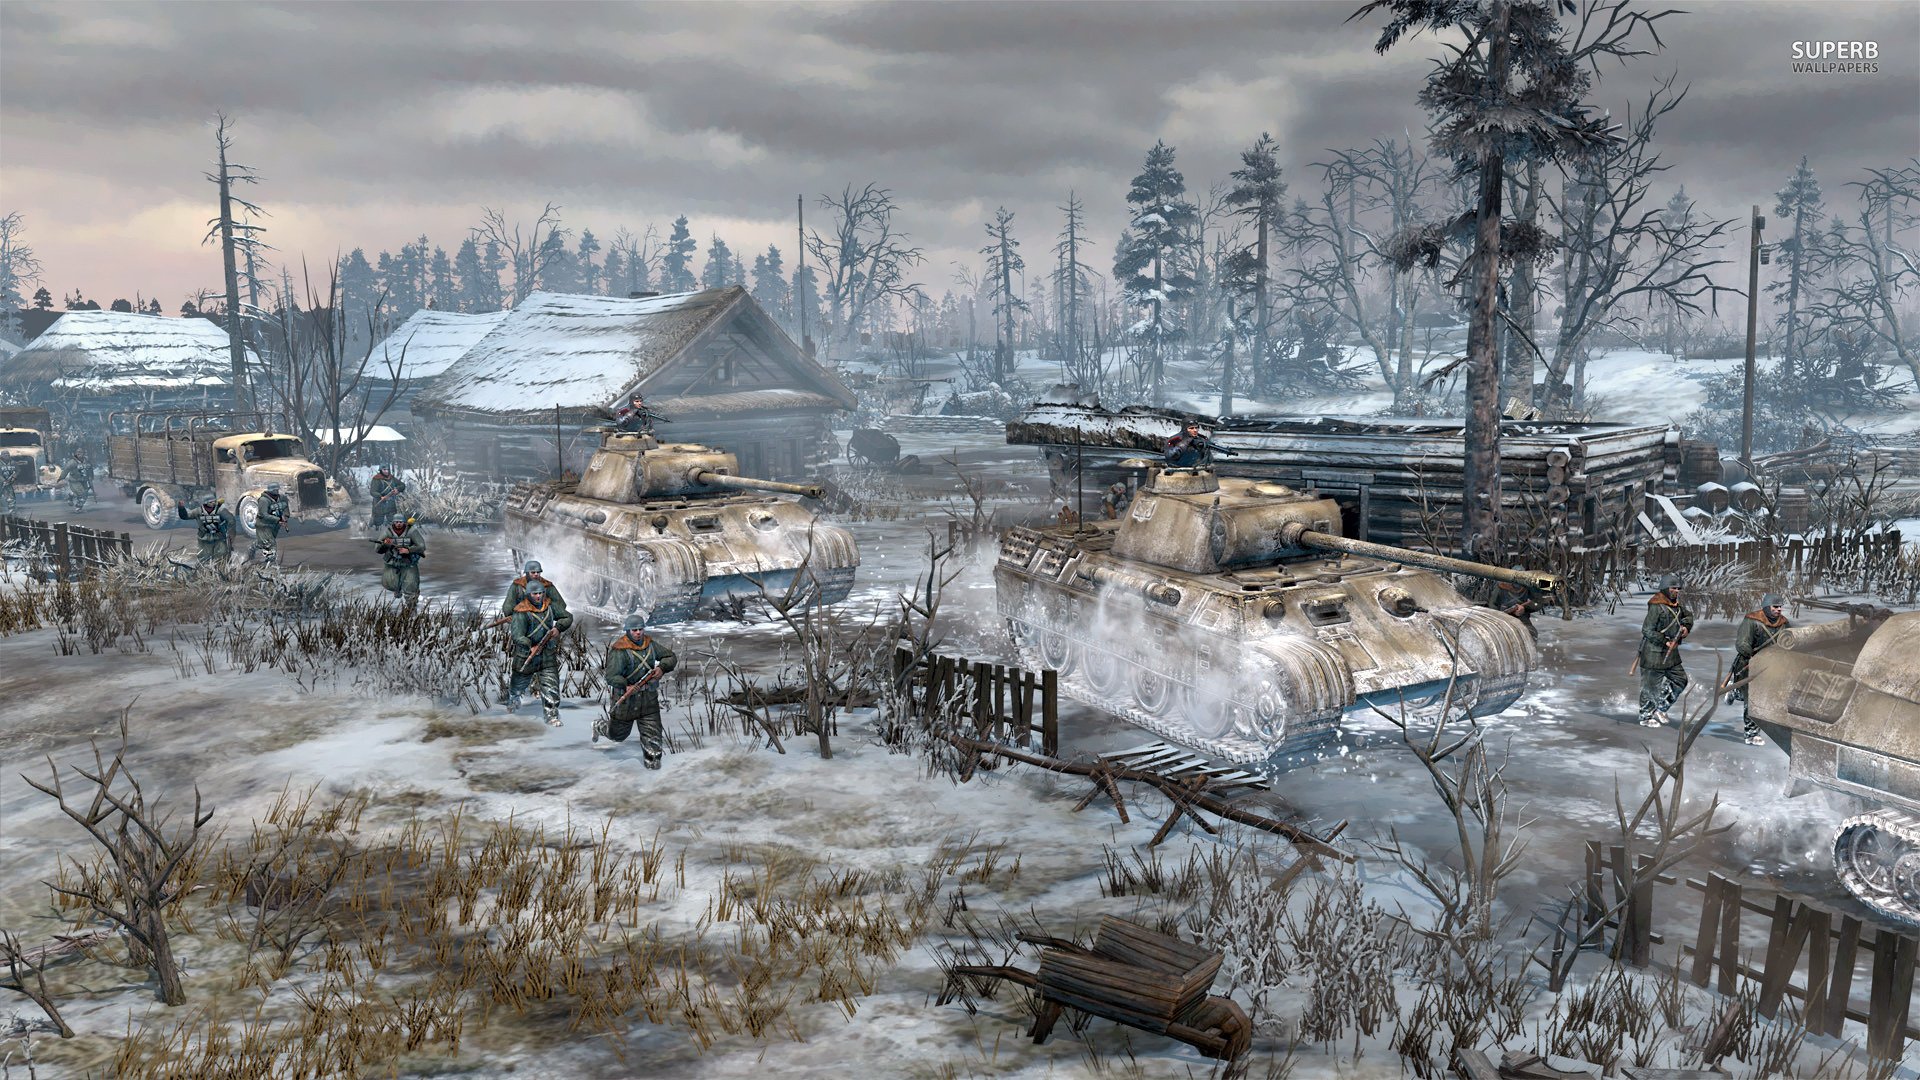 company of heroes 3 factions